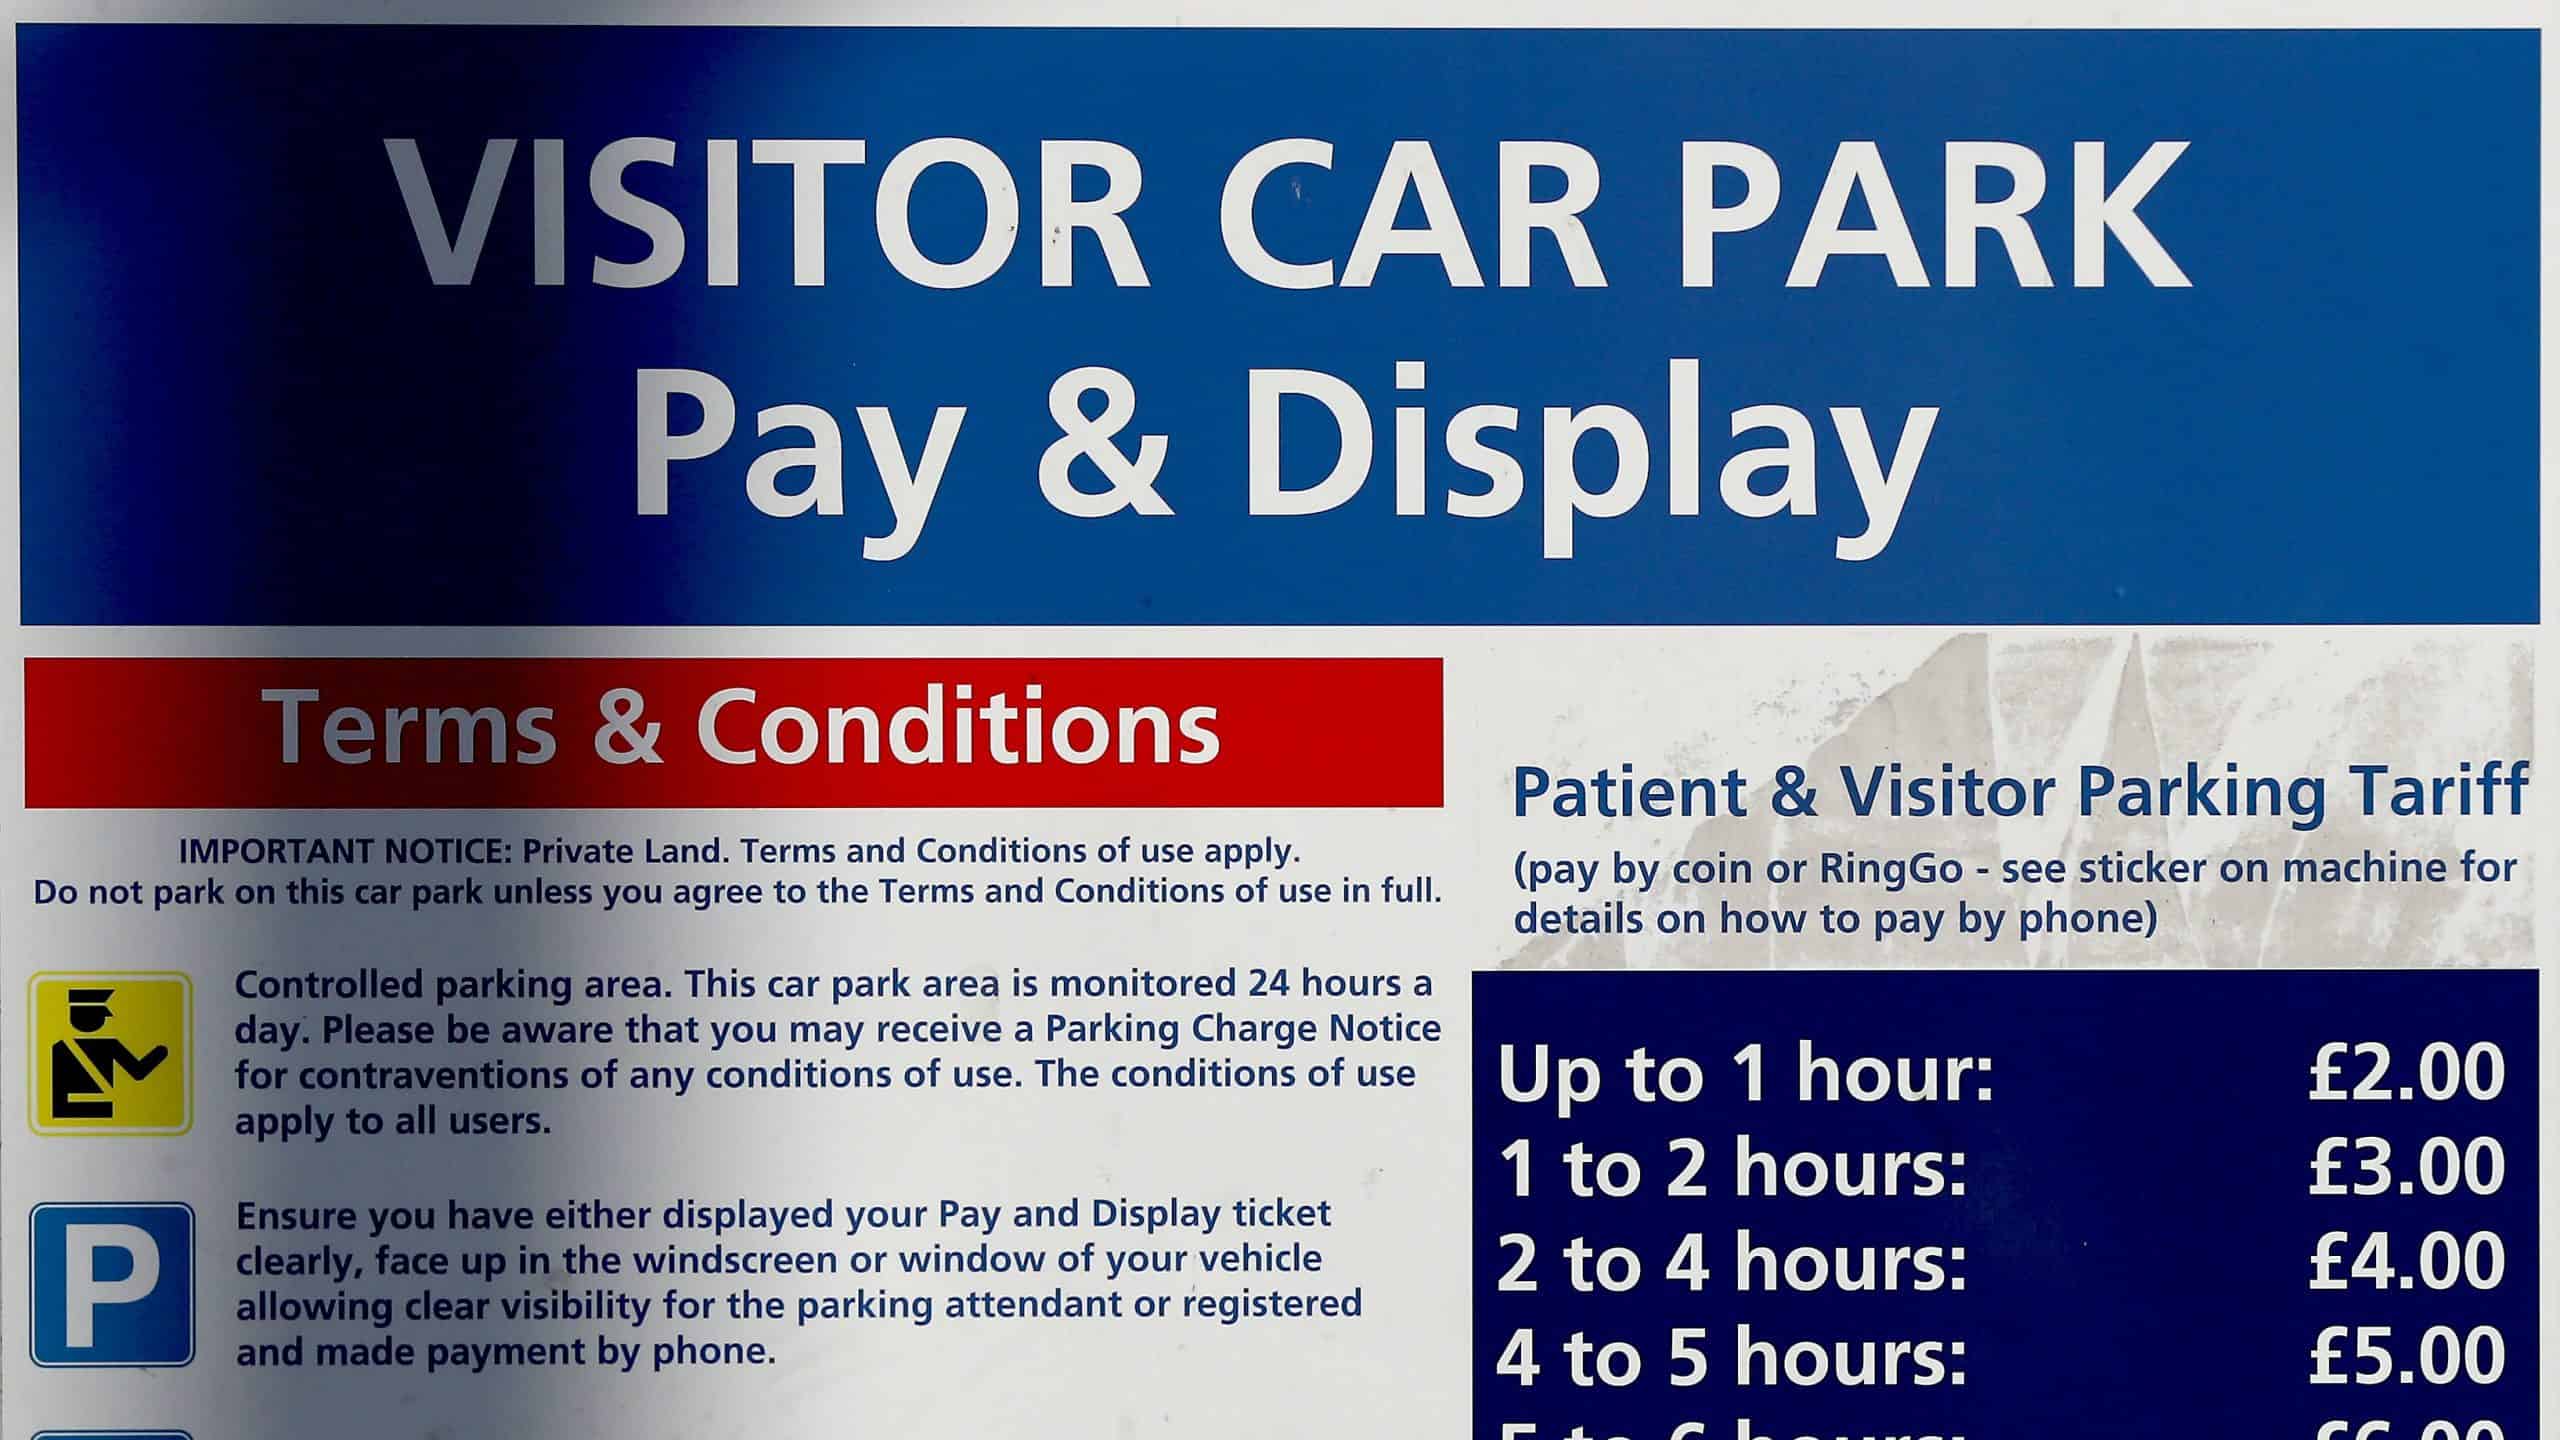 PM dismisses pleas to extend free car parking for NHS staff post-Covid-19